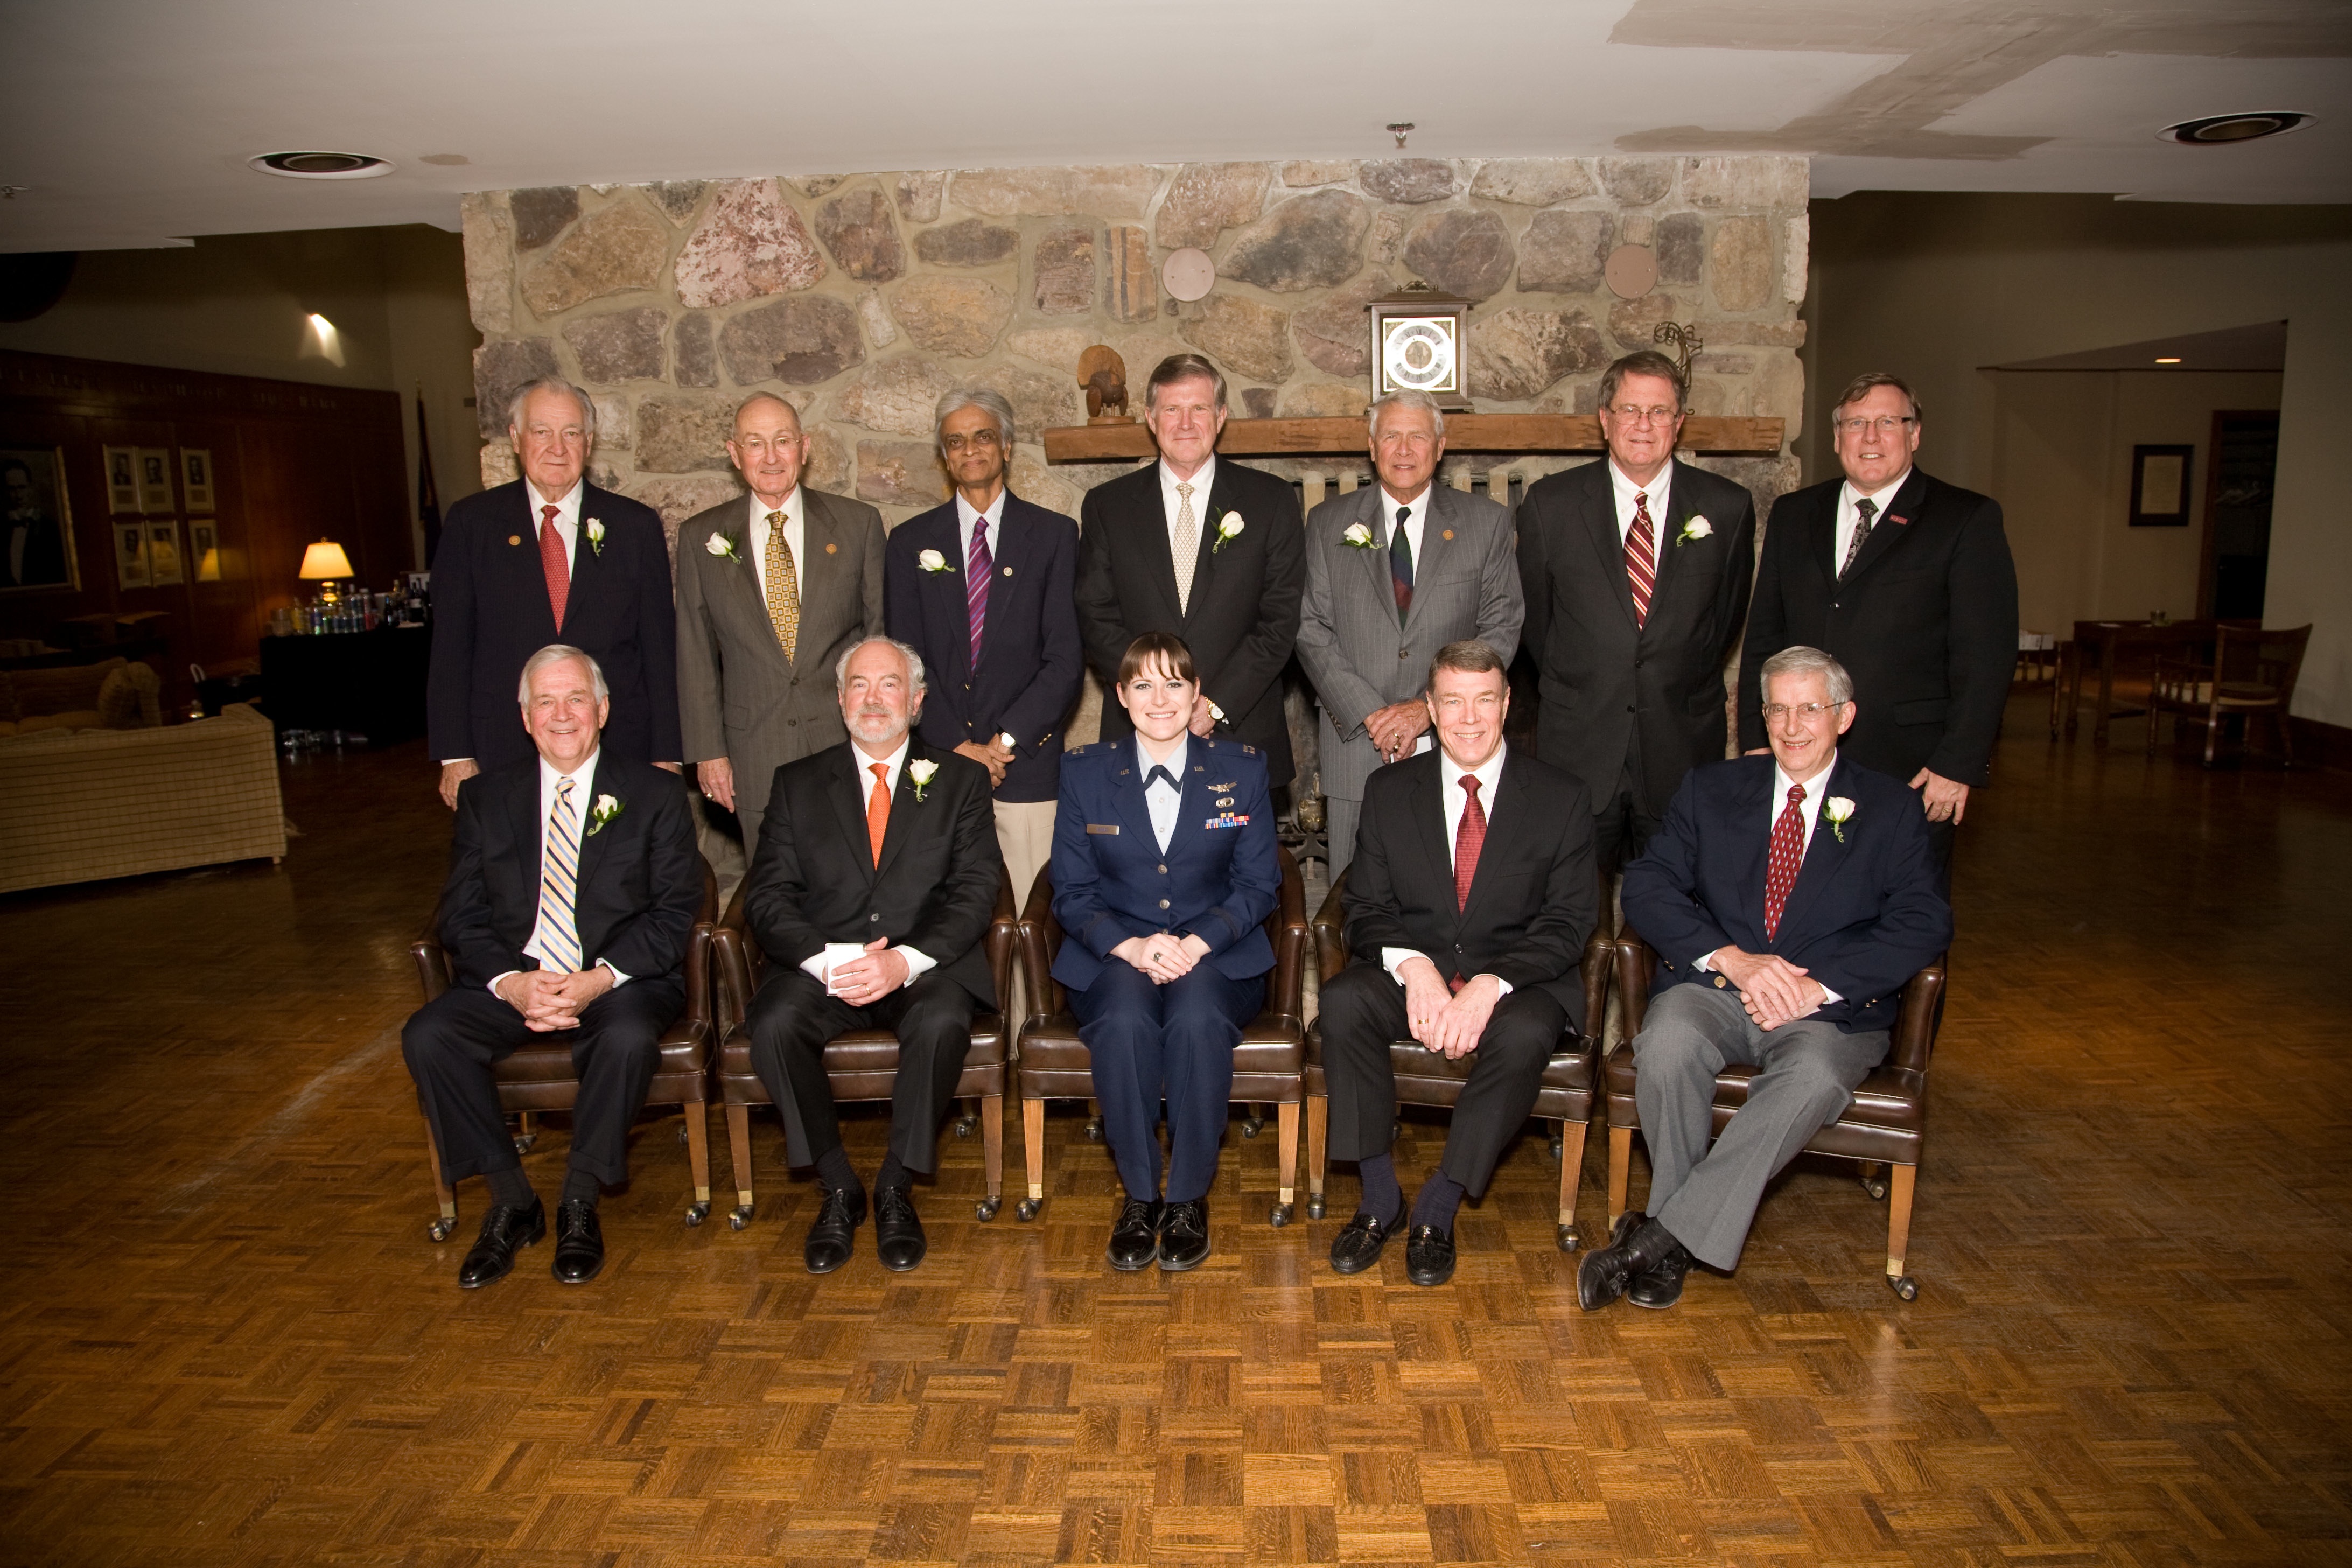 The new members of Virginia Tech's Academy of Engineering Excellence, inducted in April of 2009, front row, left to right, are: The Honorable Joe May of Leesburg, Va.; A. Ross Myers of Worcester, Pa.; Capt. Kelley Jessee (named the 2009 Outstanding Young Alumna at the same event and not a member of the Academy) of Edwards Air Force Base, Calif.; Tom Cox of Boulder, Colo.; and Joseph Vipperman Jr., of Roanoke, Va. Back row, left to right, are: Stonie Barker of Naples, Fla.; and Hendersonville, N.C.; 